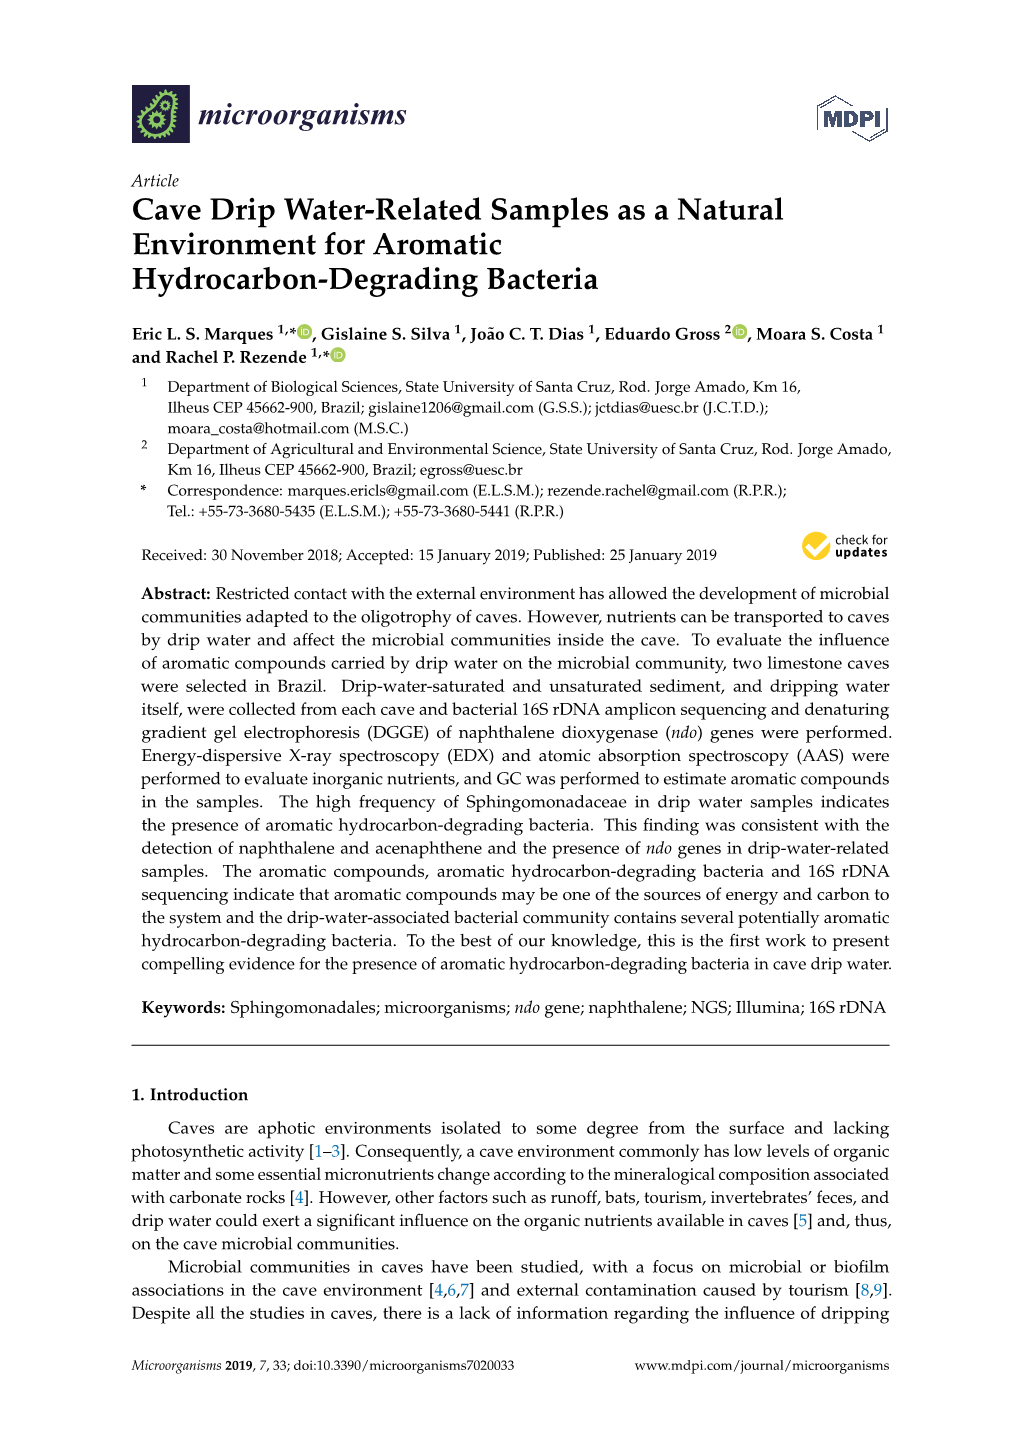 Cave Drip Water-Related Samples As a Natural Environment for Aromatic Hydrocarbon-Degrading Bacteria